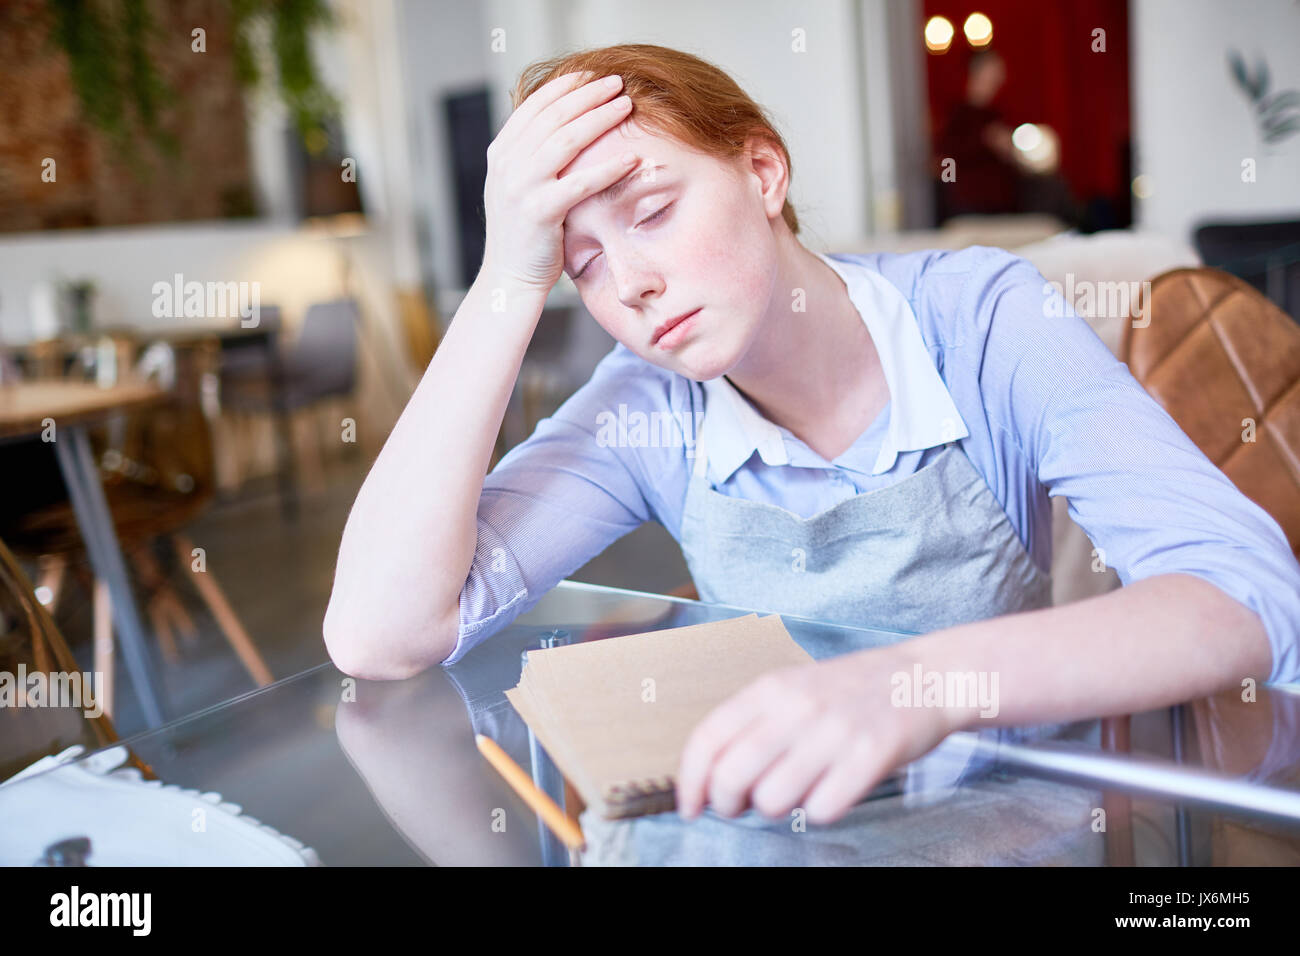 Exhausted Waitress Suffering from Headache Stock Photo